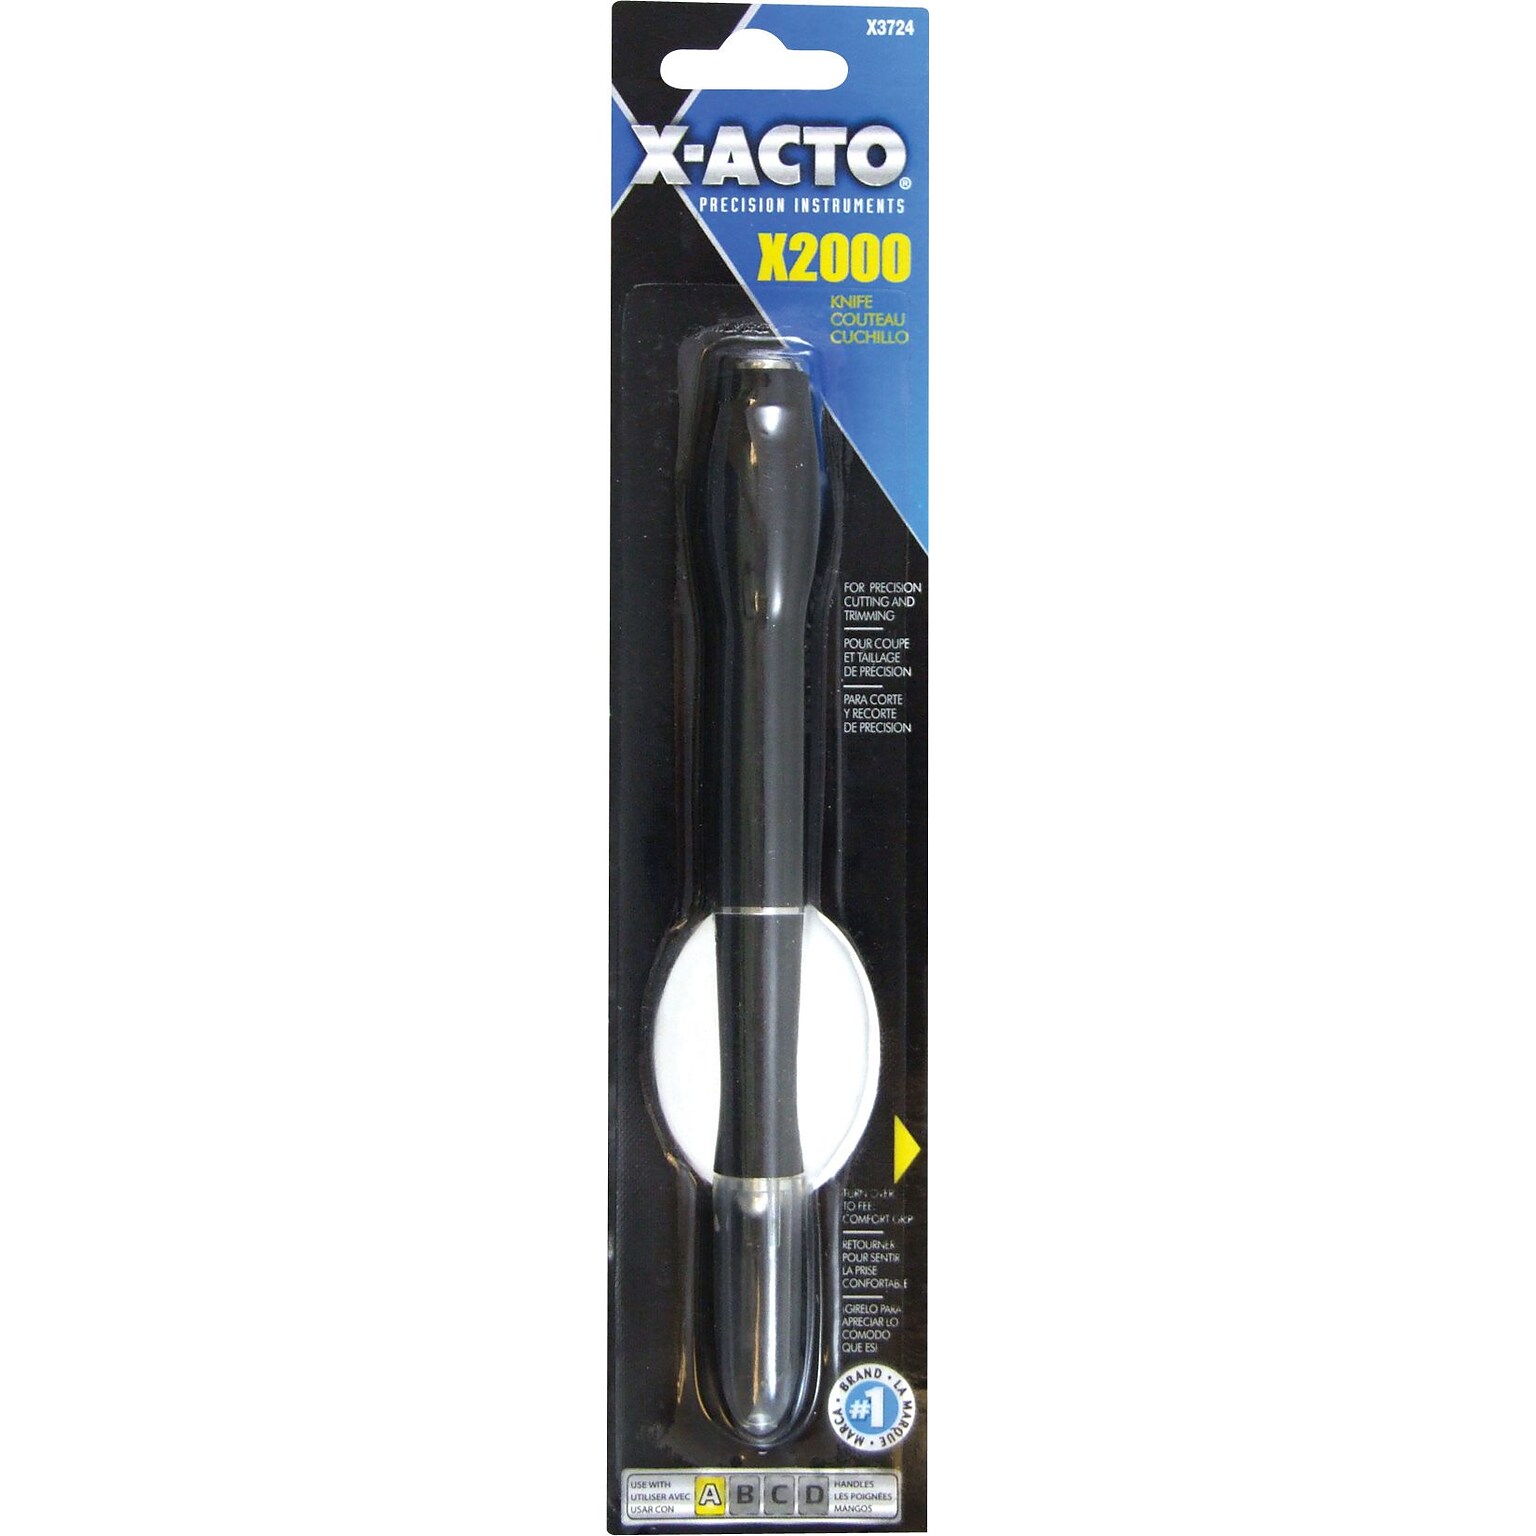 X-ACTO Precision Knife with Safety Cap, Black (X3724)